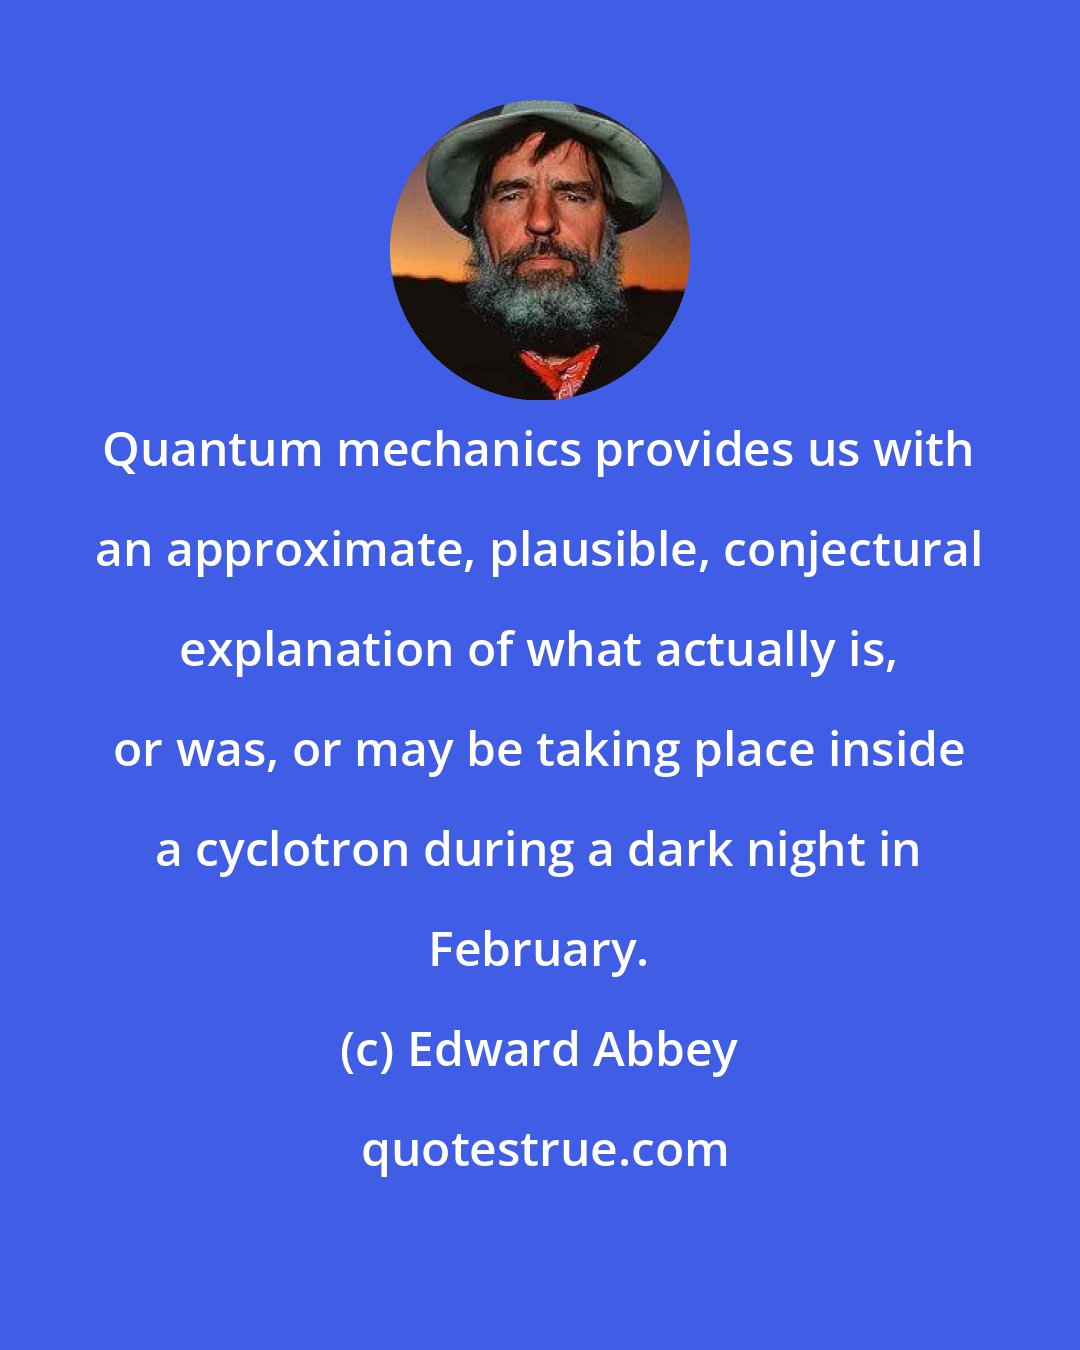 Edward Abbey: Quantum mechanics provides us with an approximate, plausible, conjectural explanation of what actually is, or was, or may be taking place inside a cyclotron during a dark night in February.